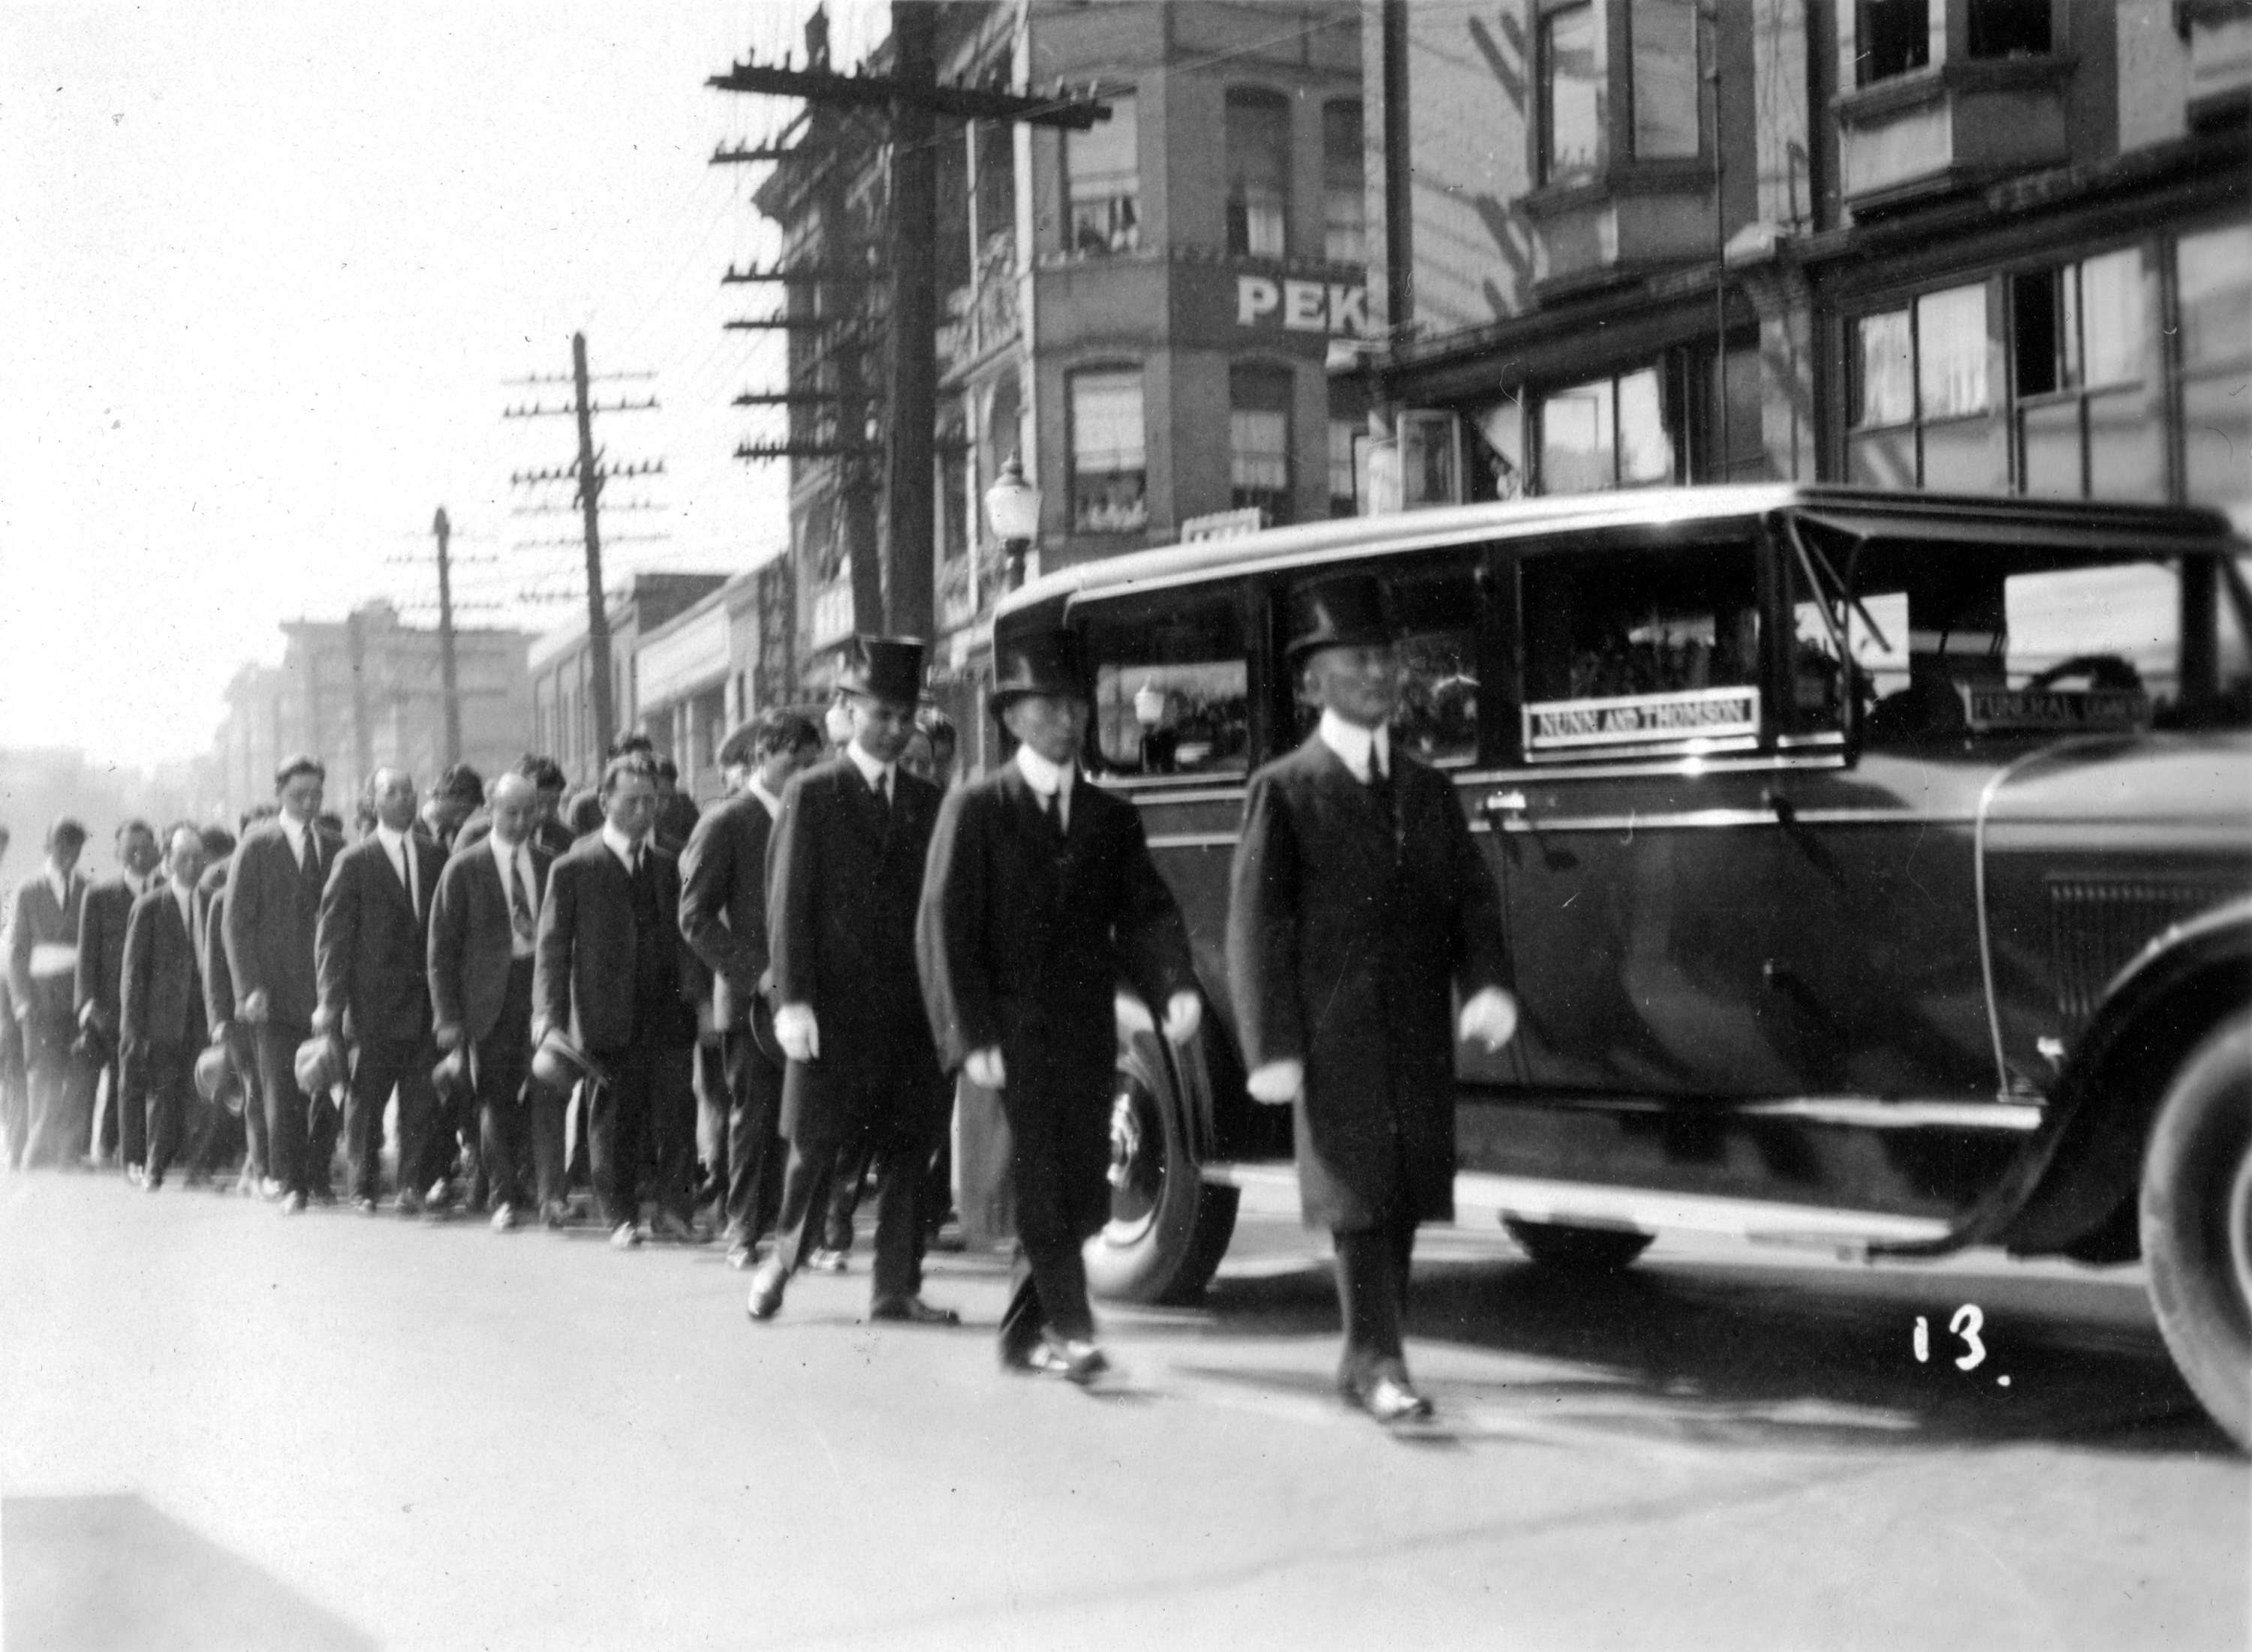 A black-and-white photo of a funeral profession with men in suits and top hats beside a hearse.